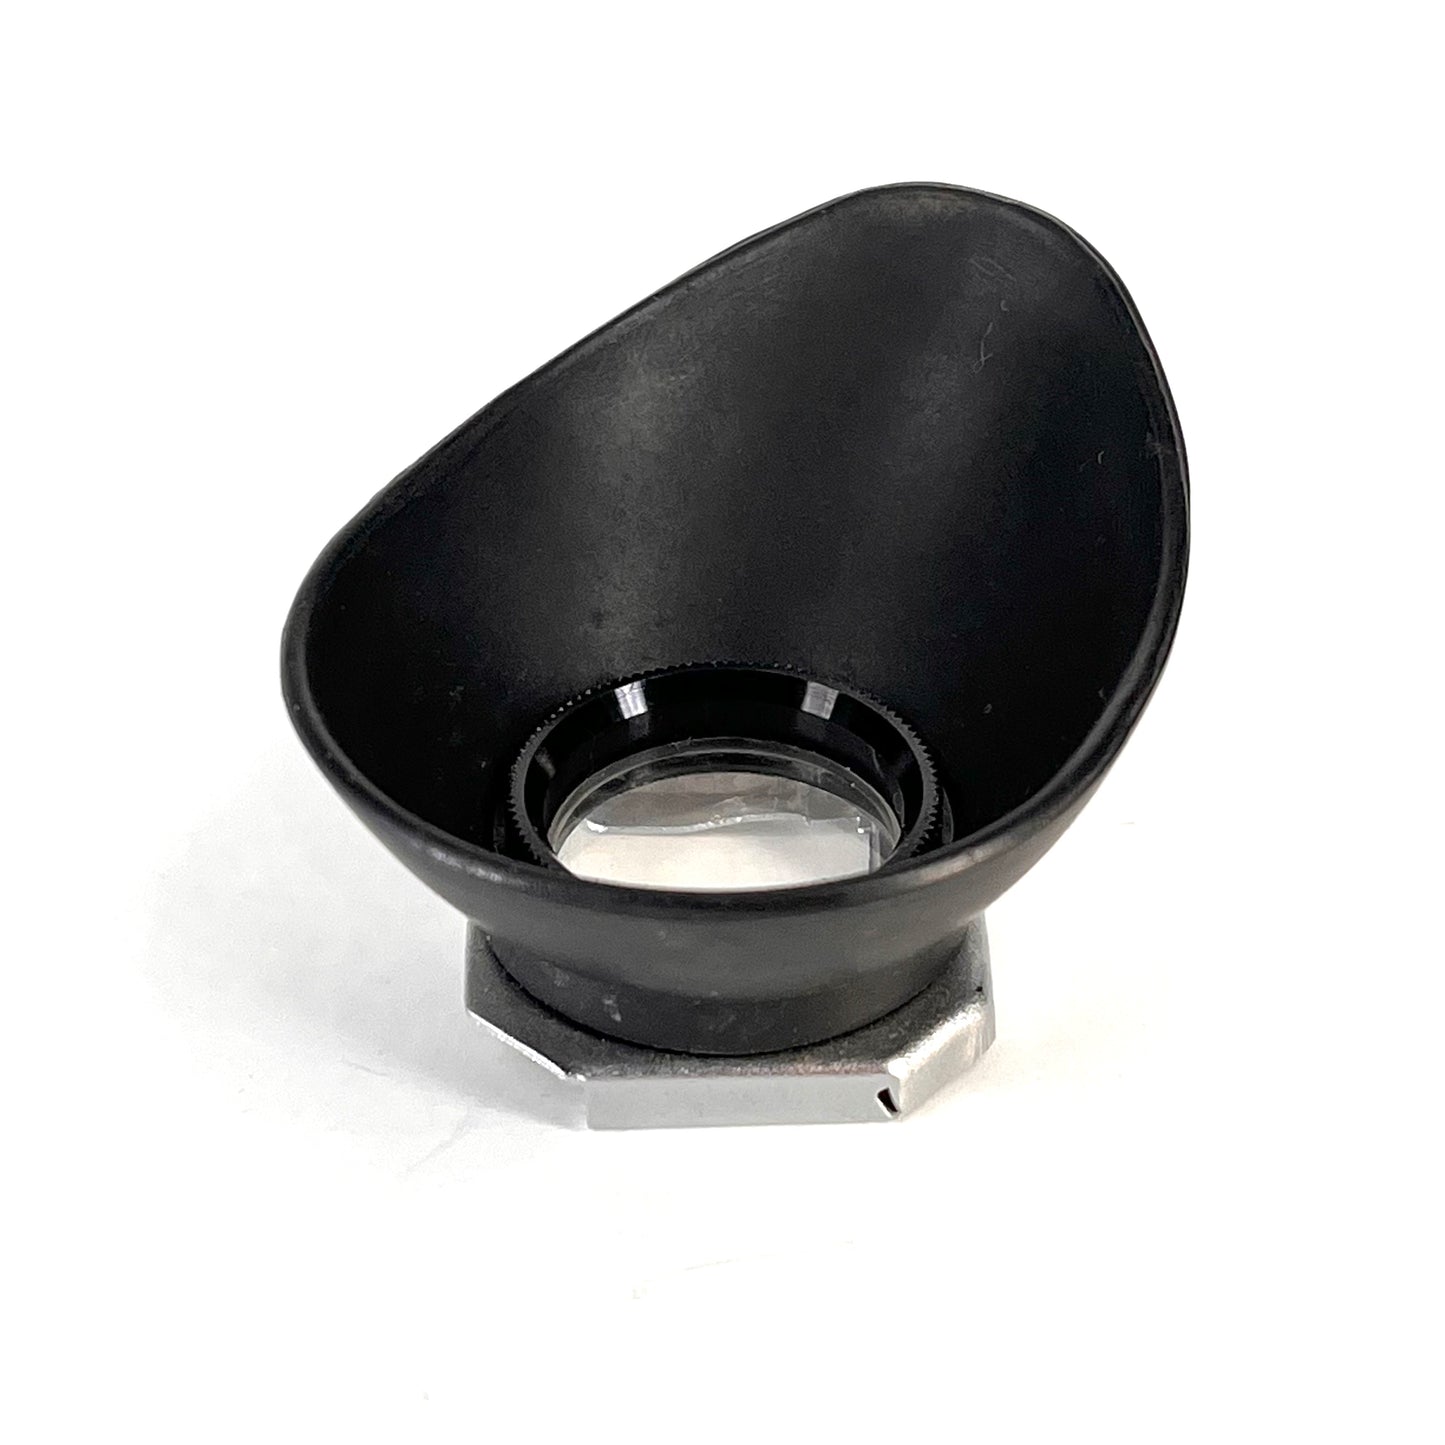 Rubber eyepiece for viewfinder